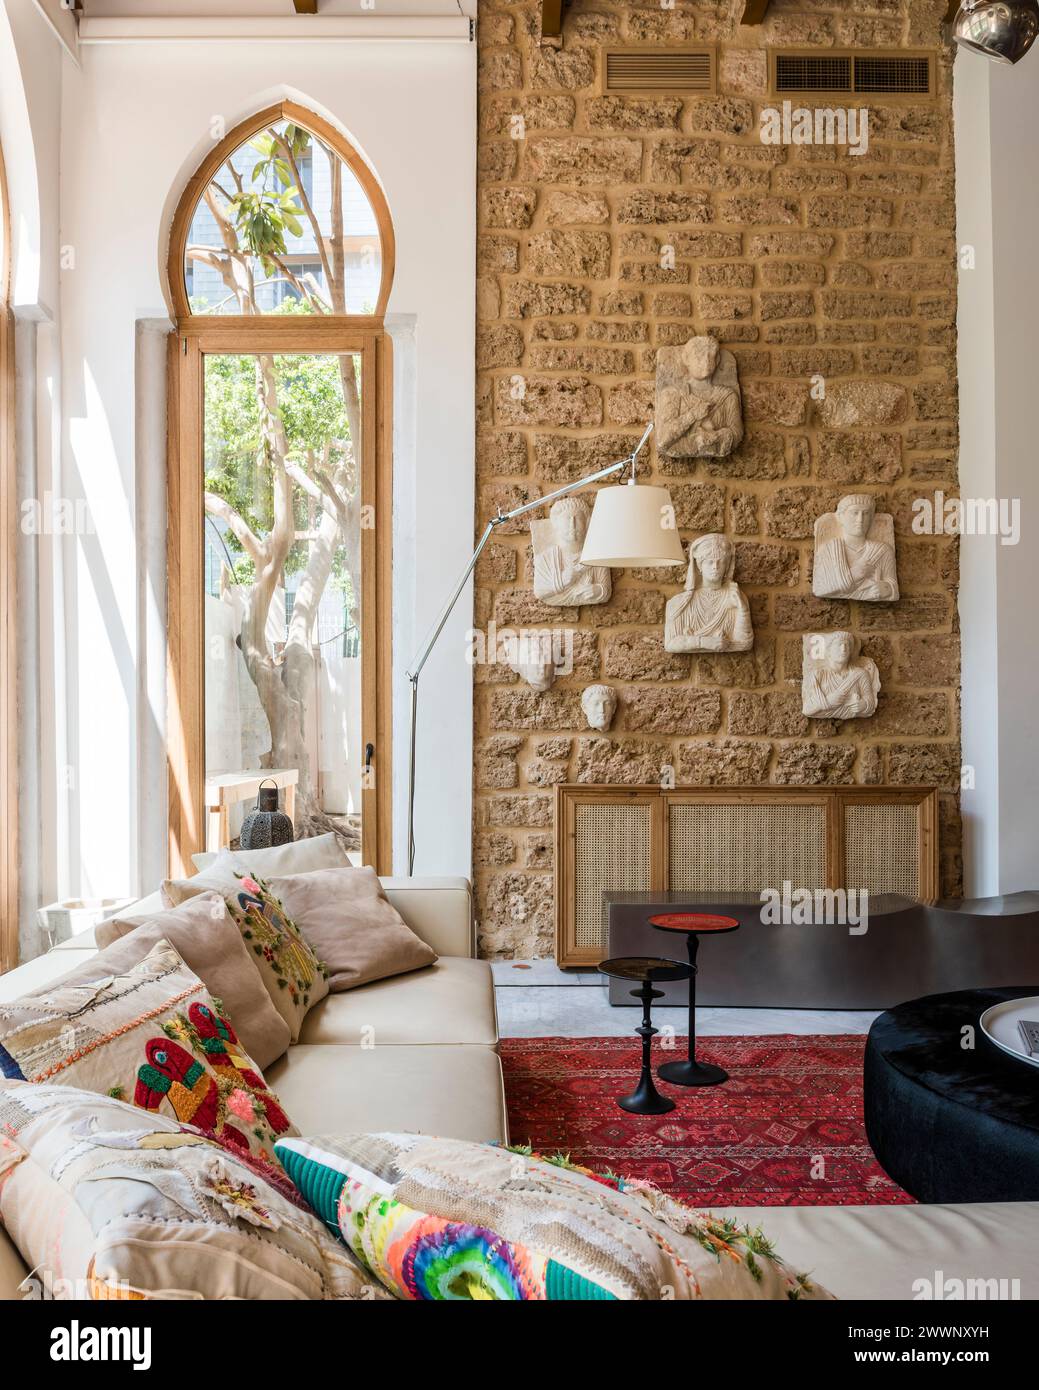 Relief carvings on exposed stone wall in luxury apartment in Beirut, Lebanon. Stock Photo